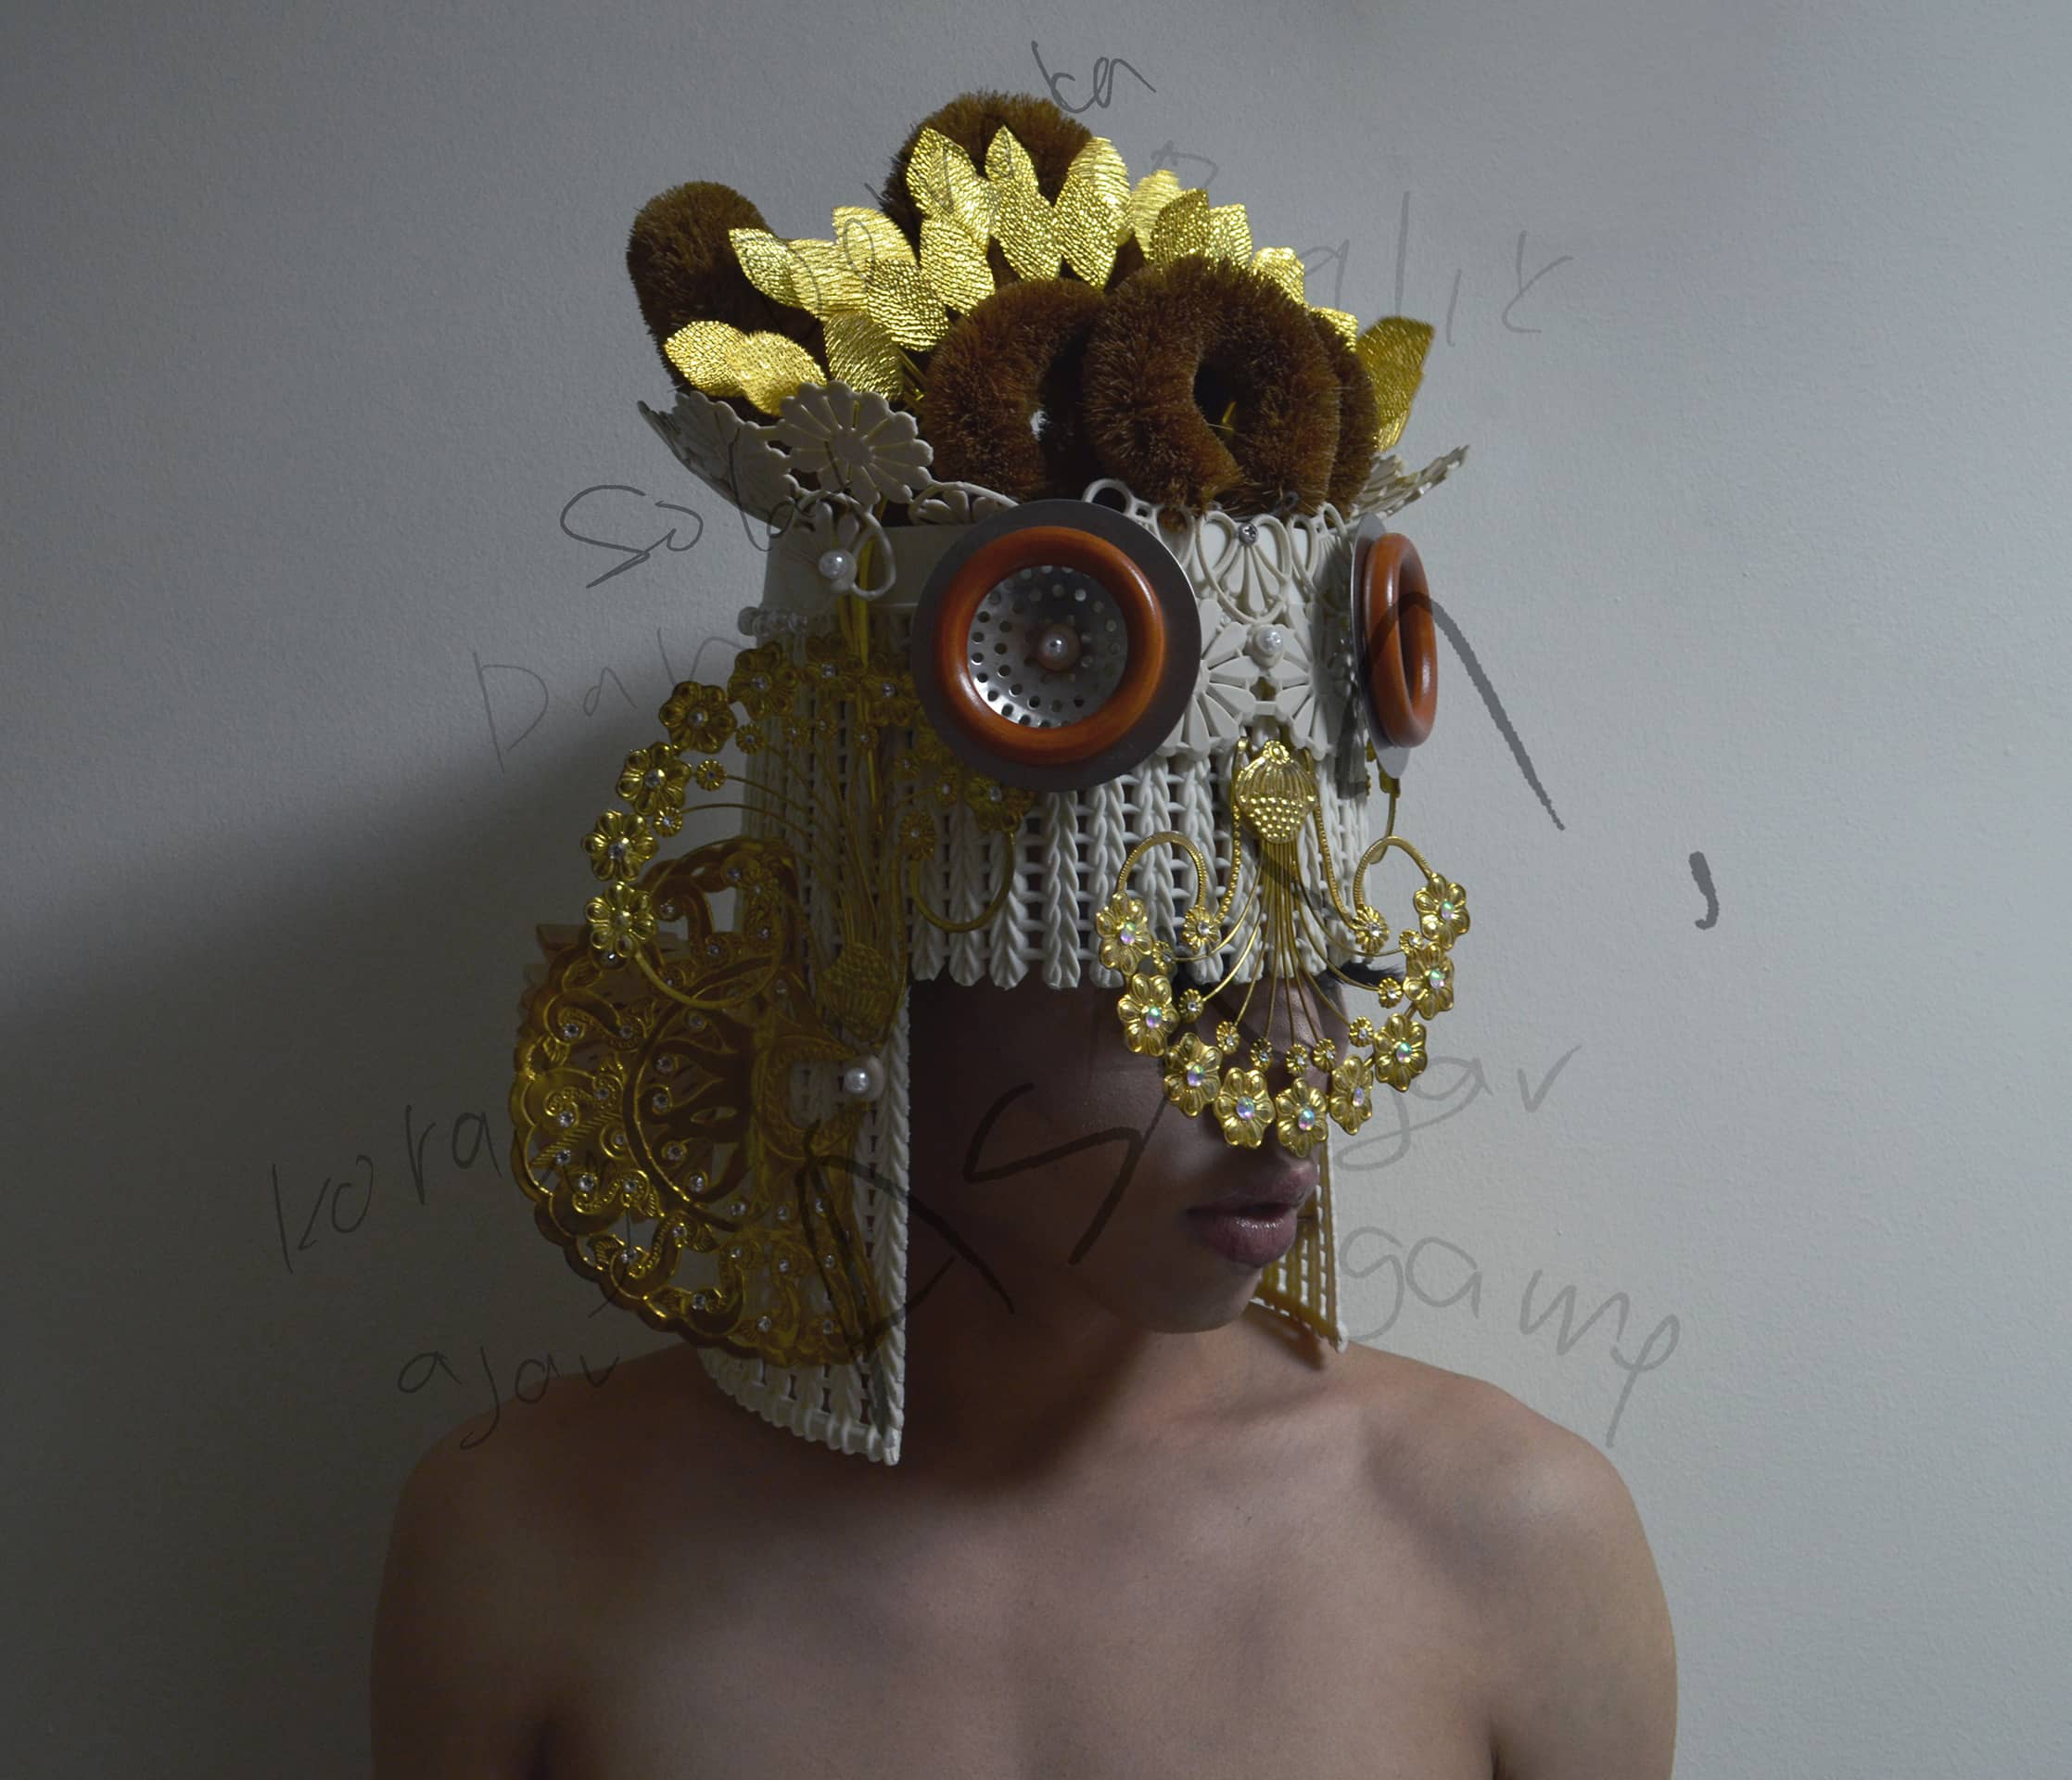 Twinkling Fortress Poster, a person wearing a head dress made of random household objects